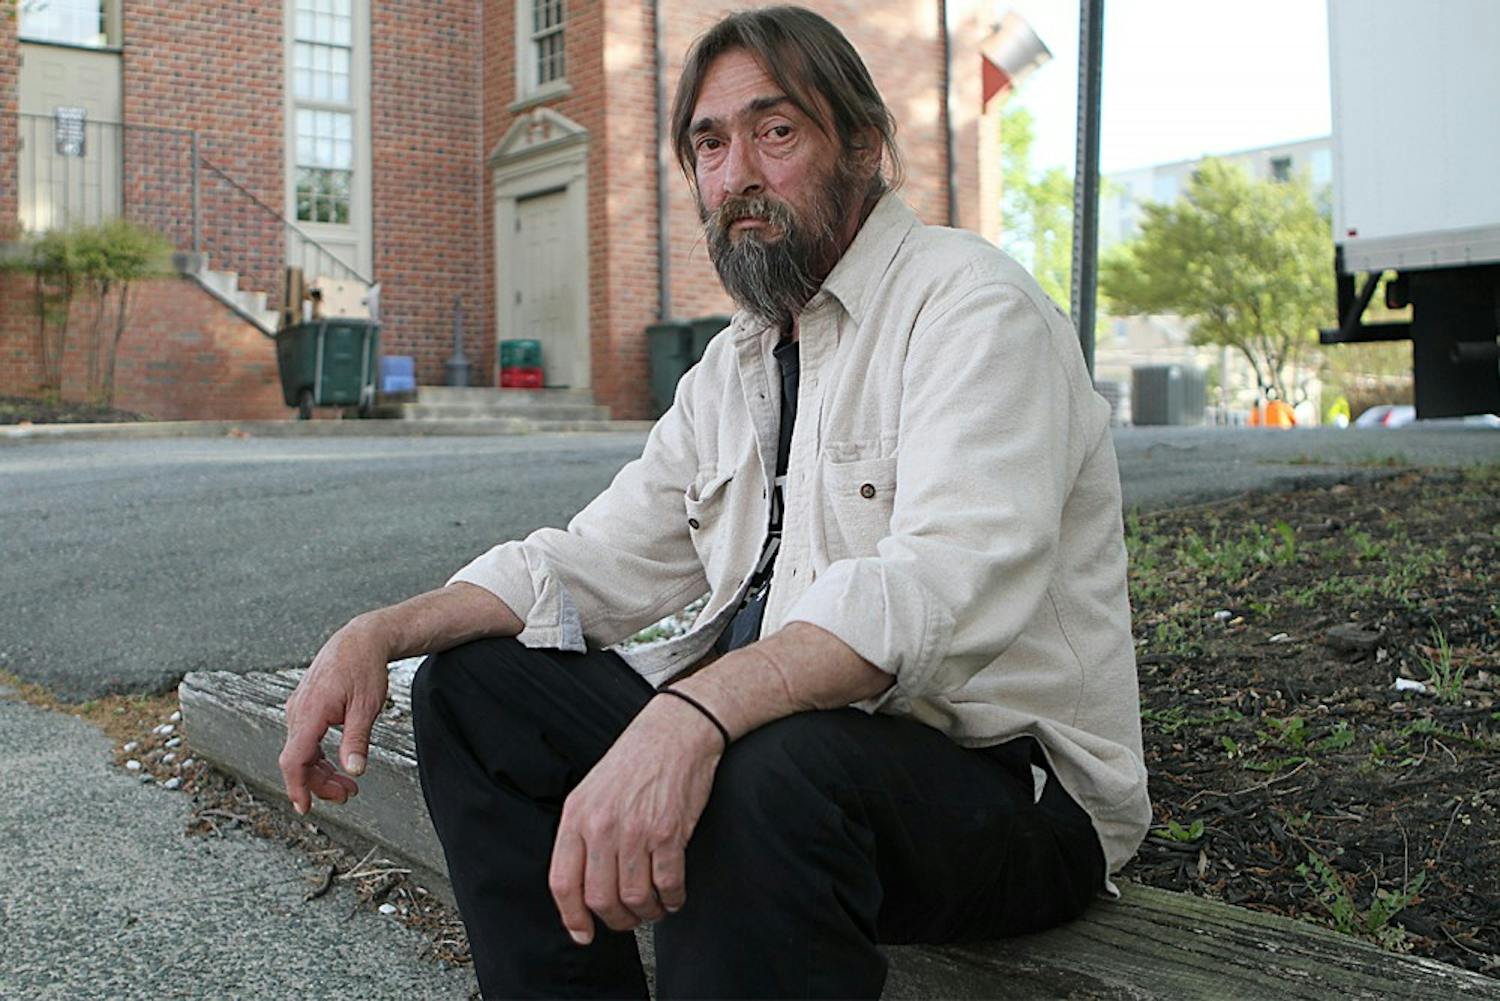 Tommy Keeter sits outside the IFC, a local homeless shelter located on Rosemary Street. Keeter says the IFC has several services available for the homeless, including medical and psychiatric care.